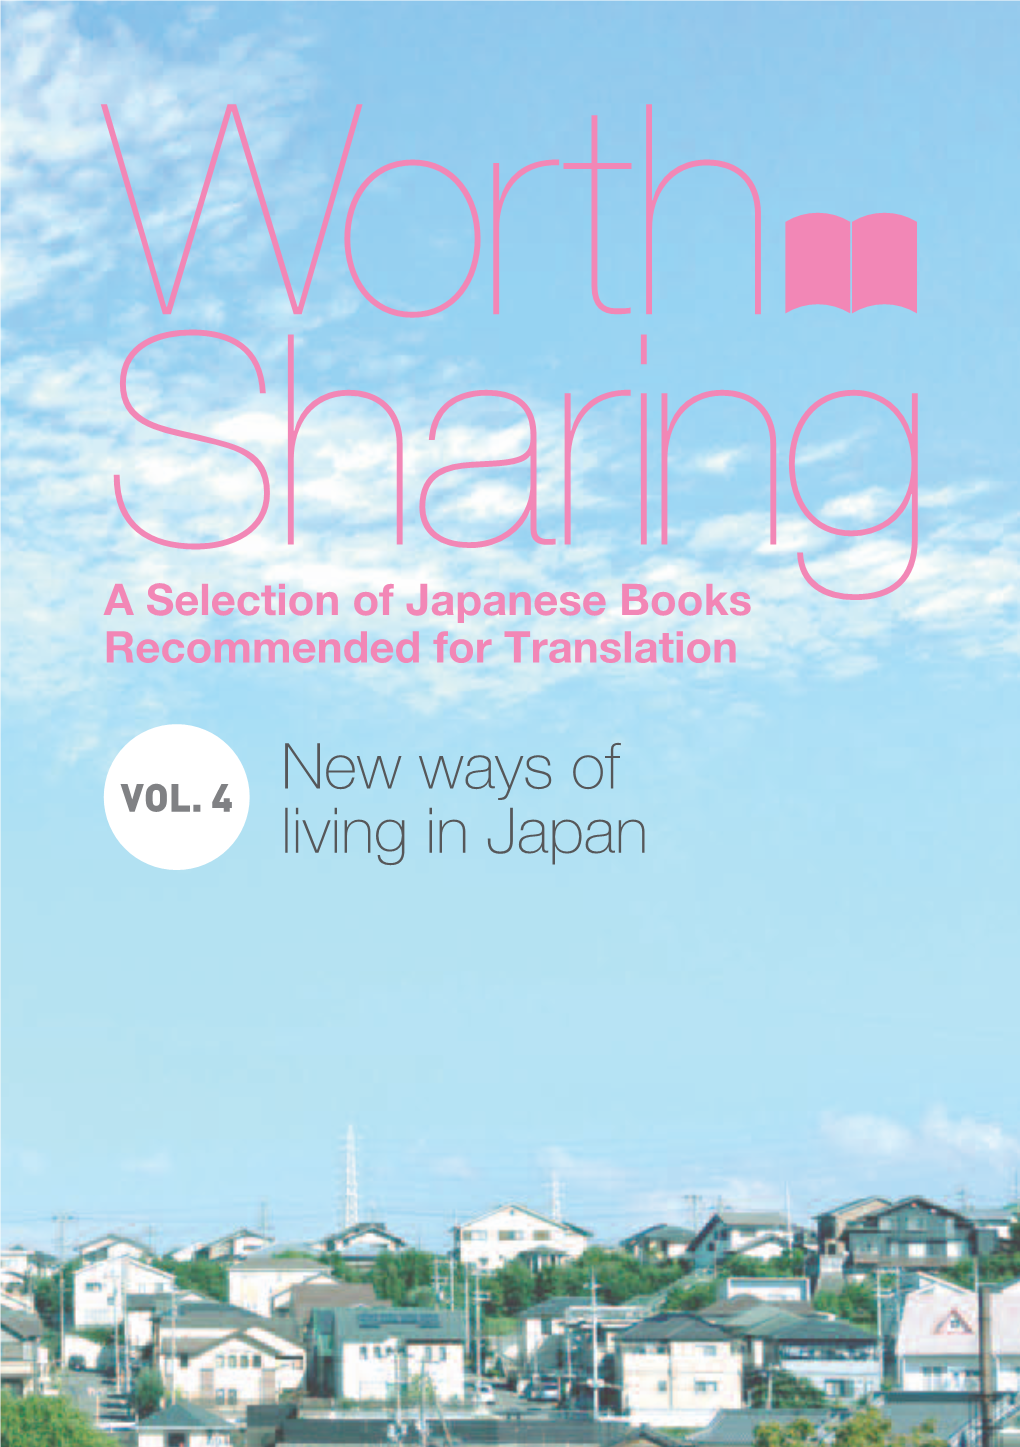 New Ways of Living in Japan